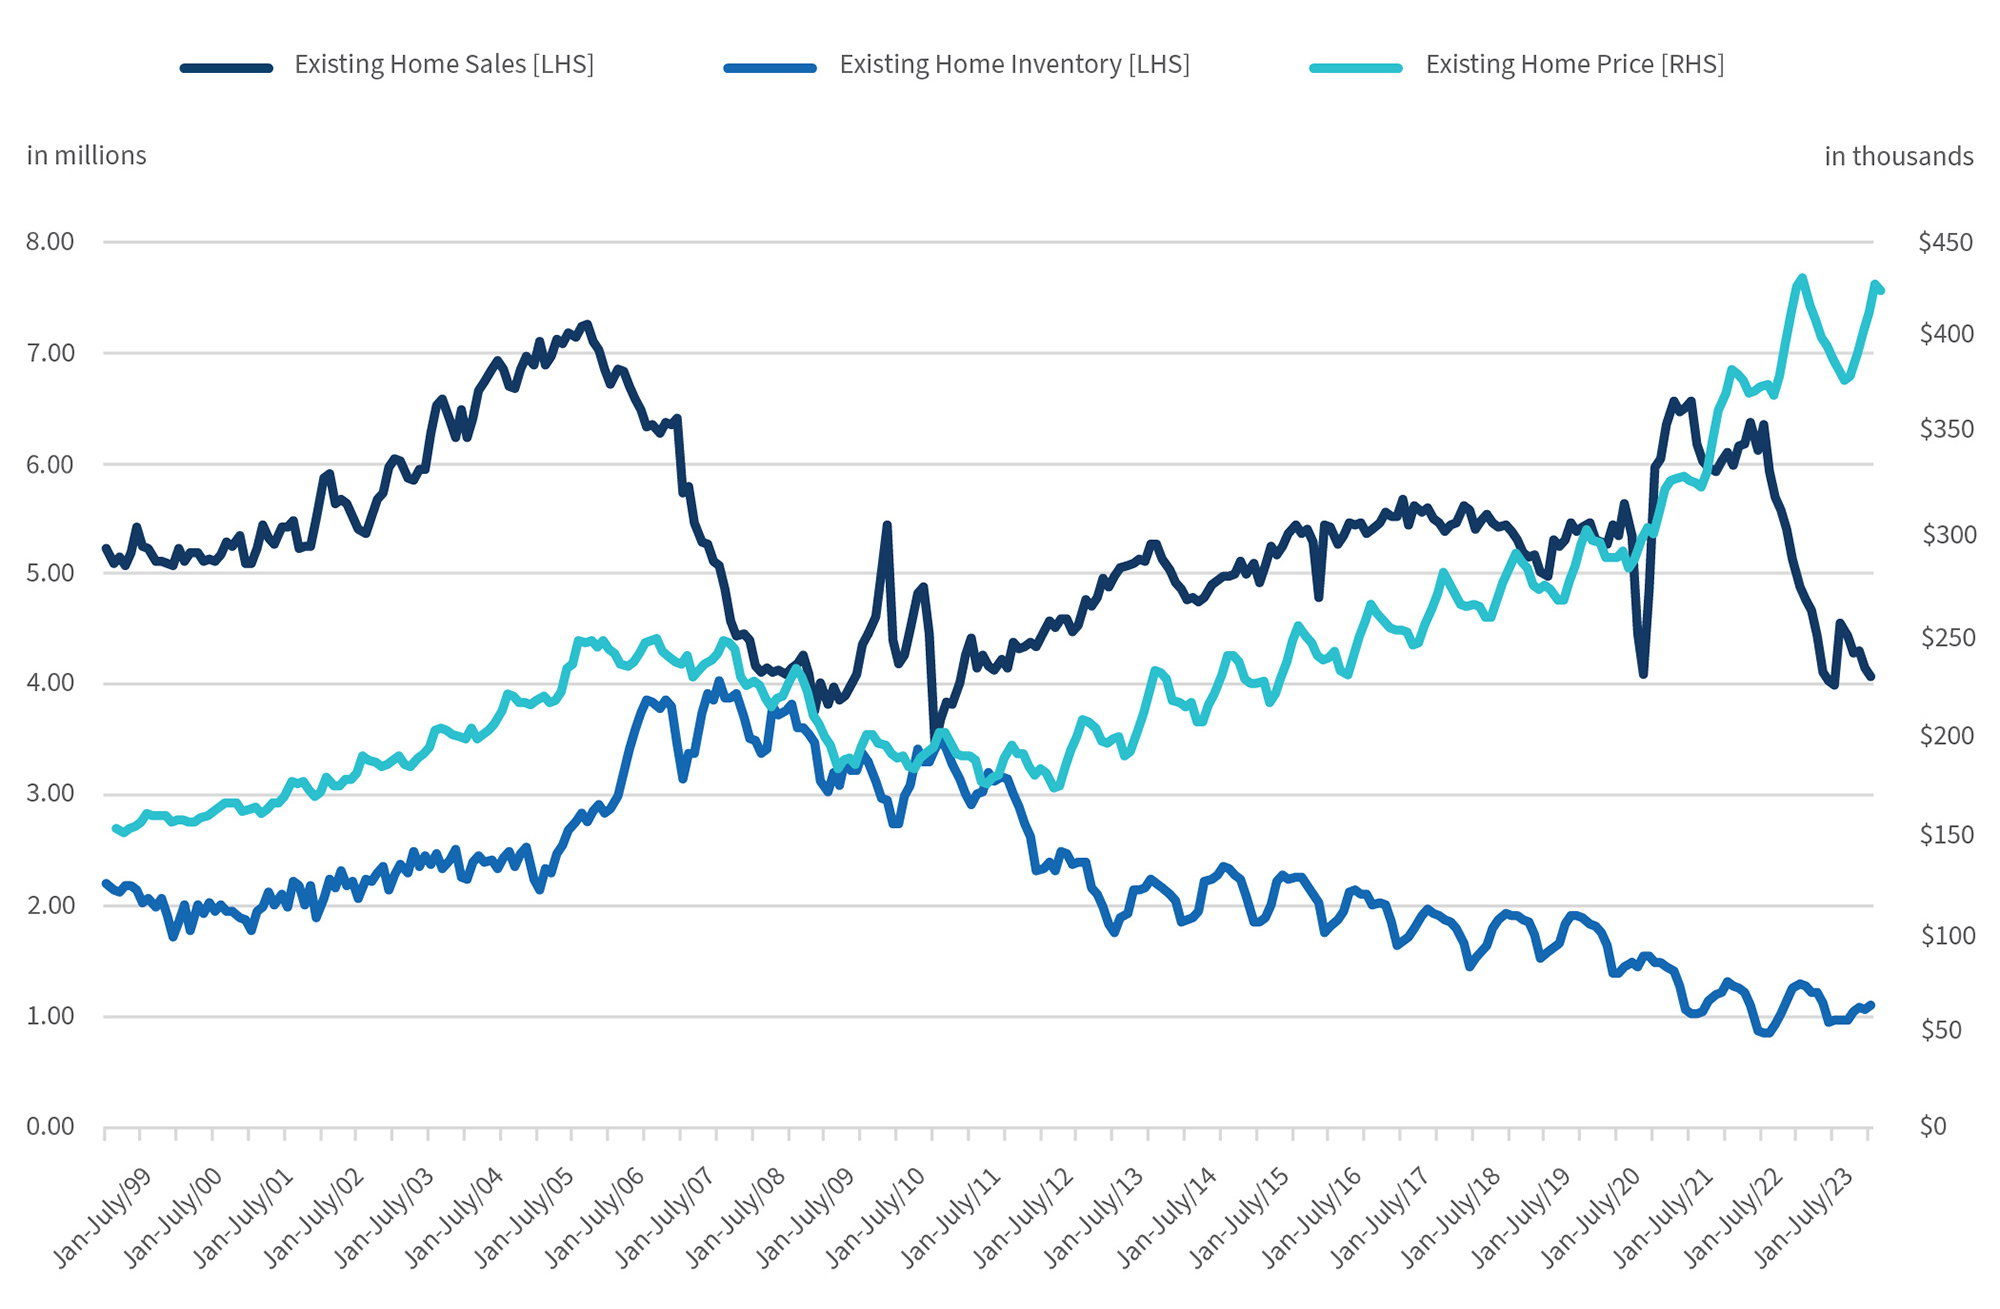 Existing Home Sales, Inventory and Prices